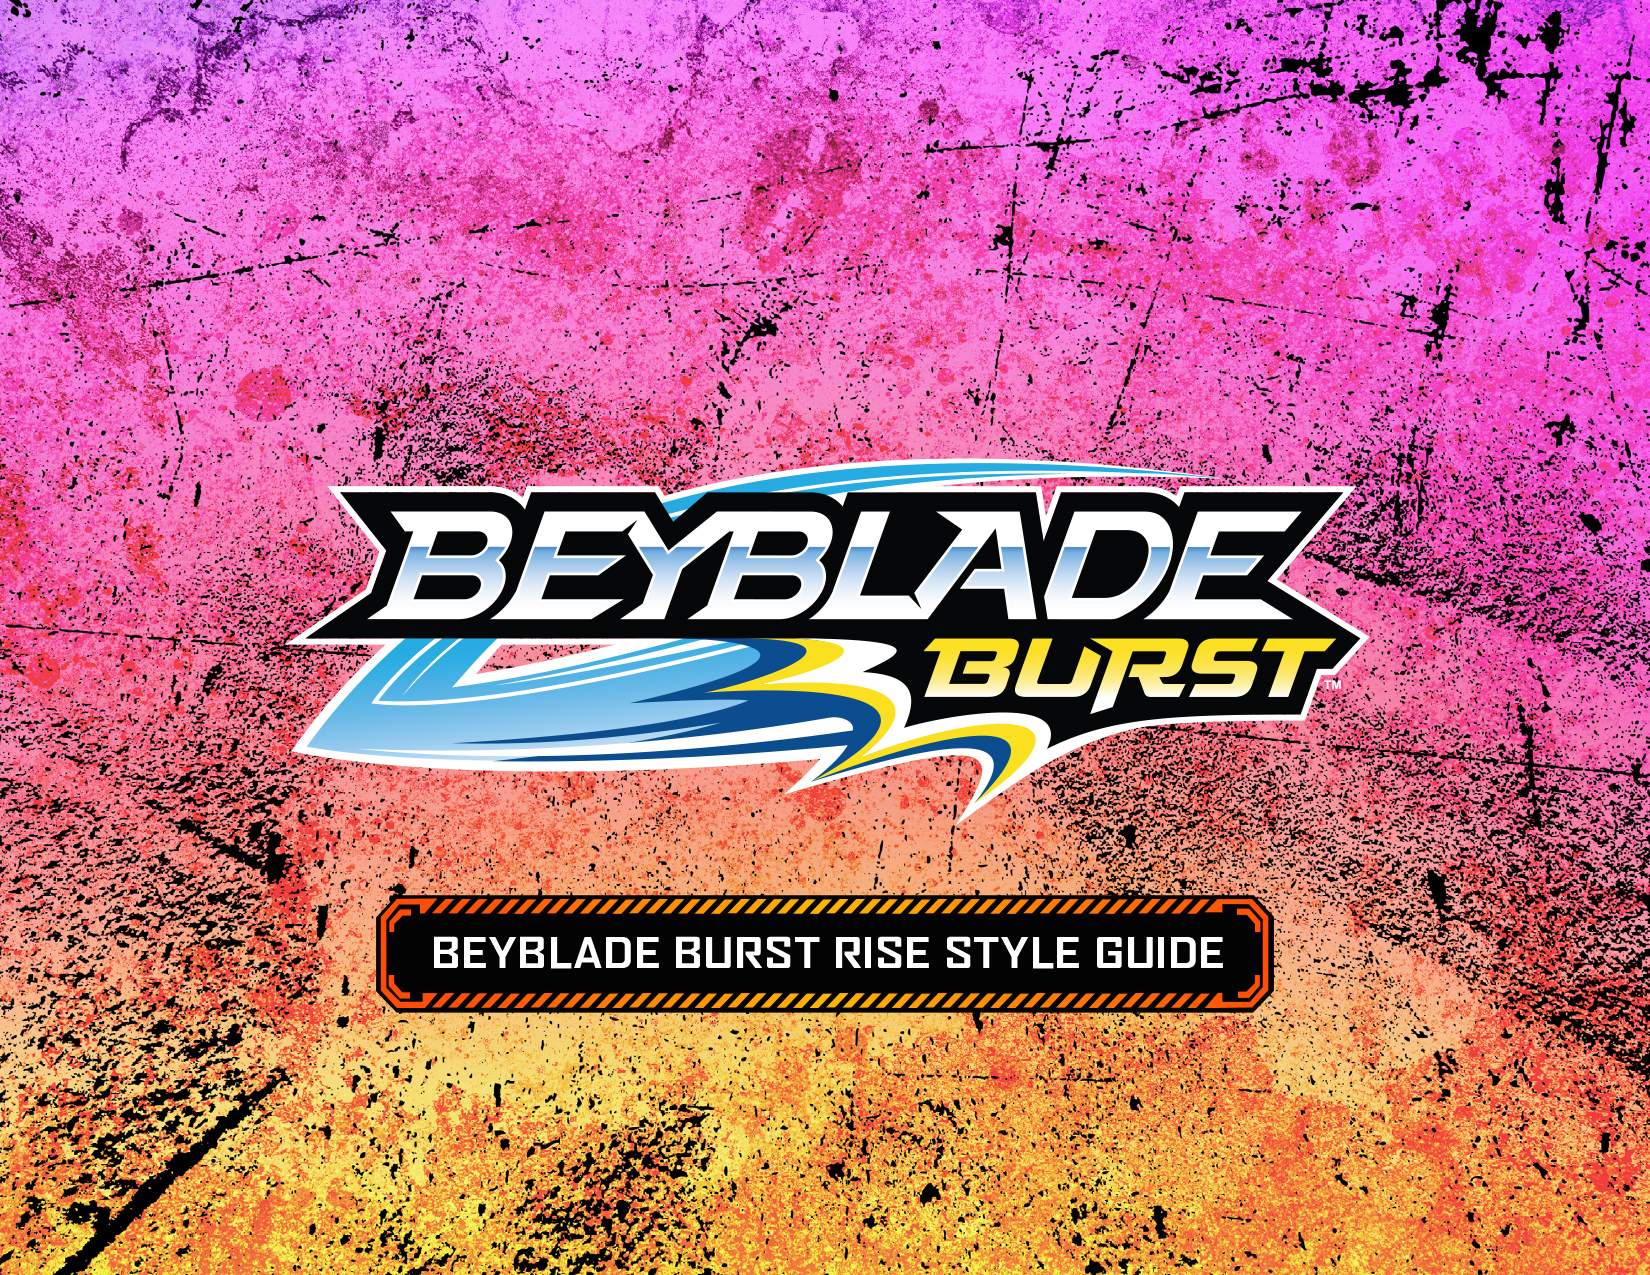 Beyblade Burst Global Brand Licensing Rise Style Guide Cover